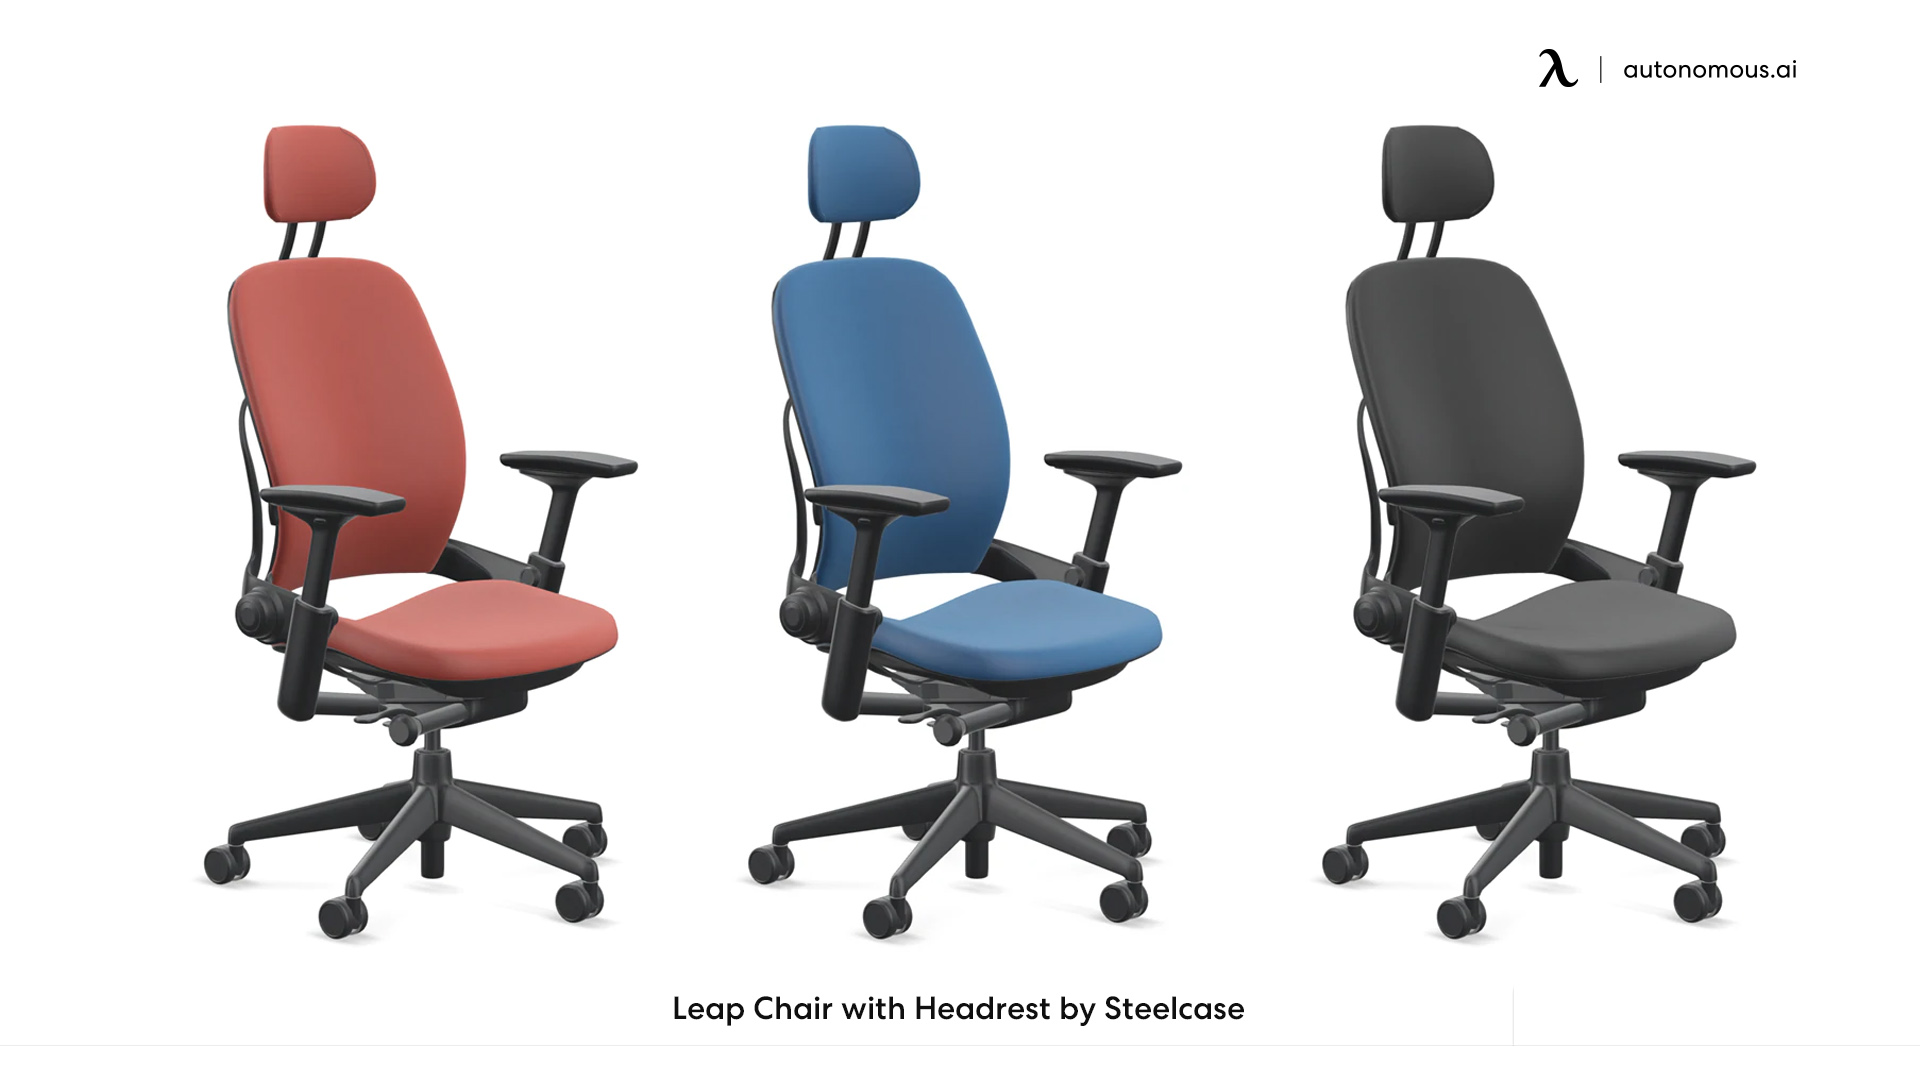 Leap plush office chair with Headrest by Steelcase